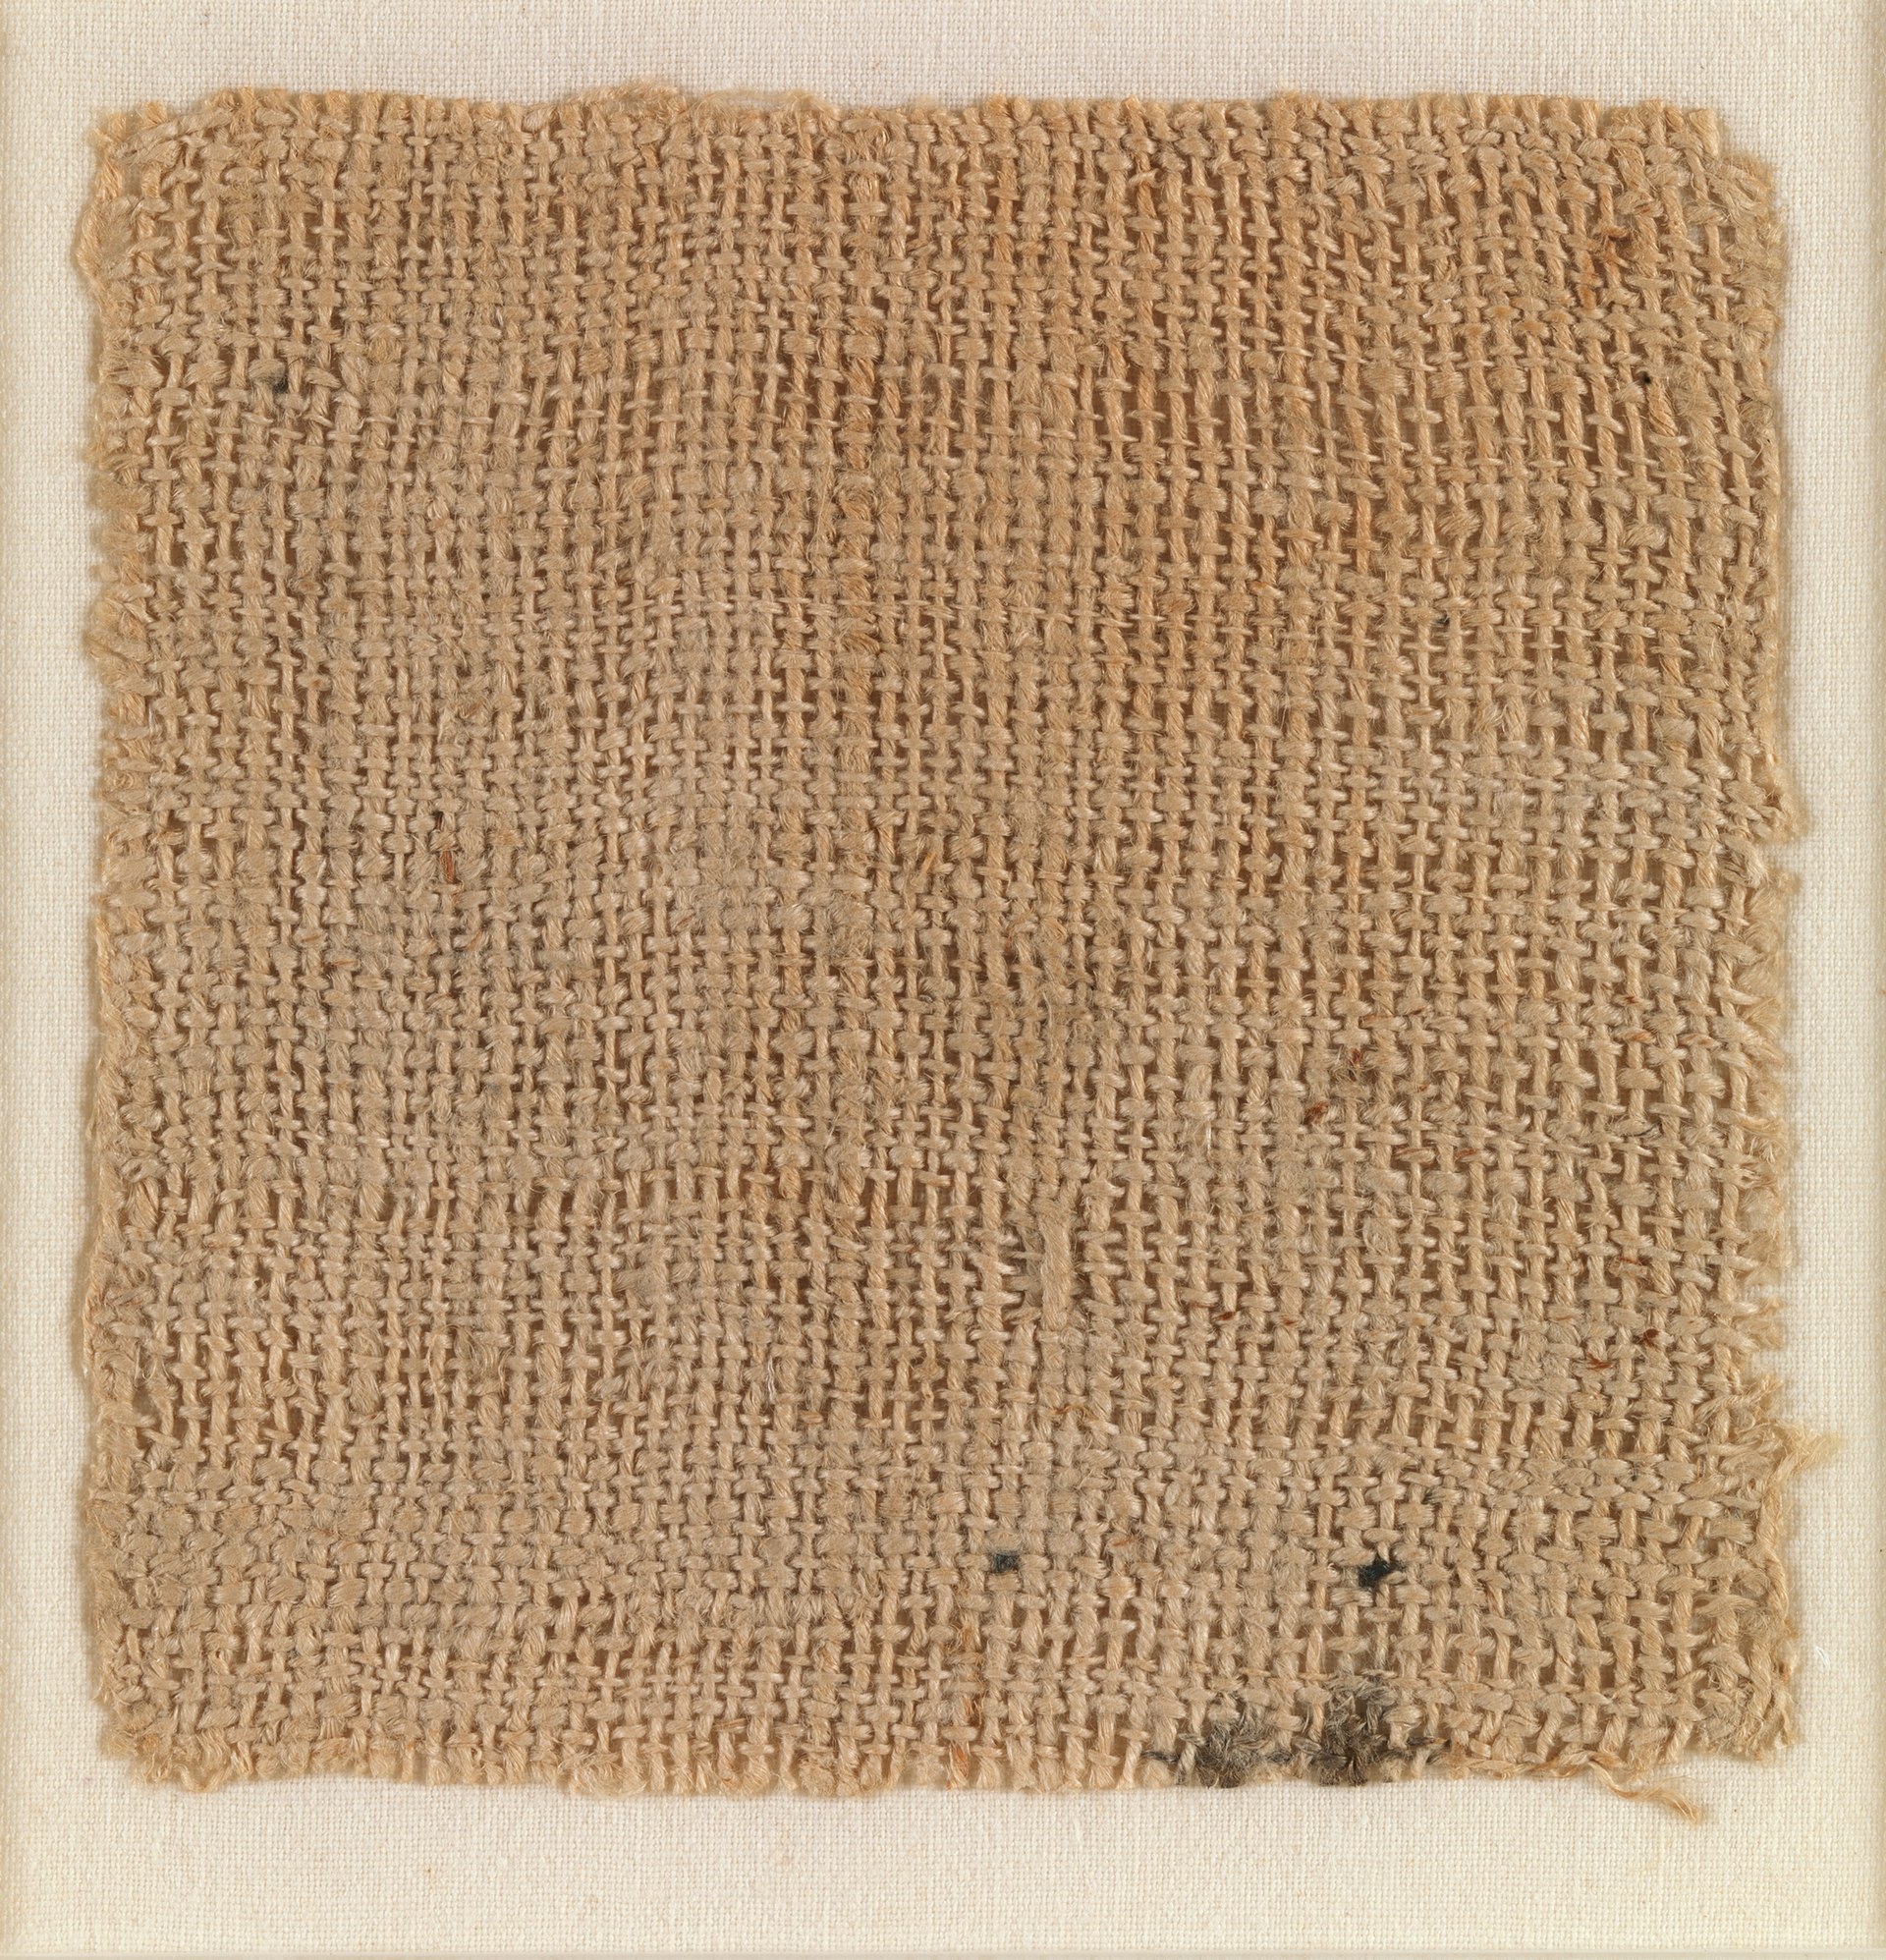 Sample of ancient Egyptian linen from Saqqara, dating to 390-343 BC